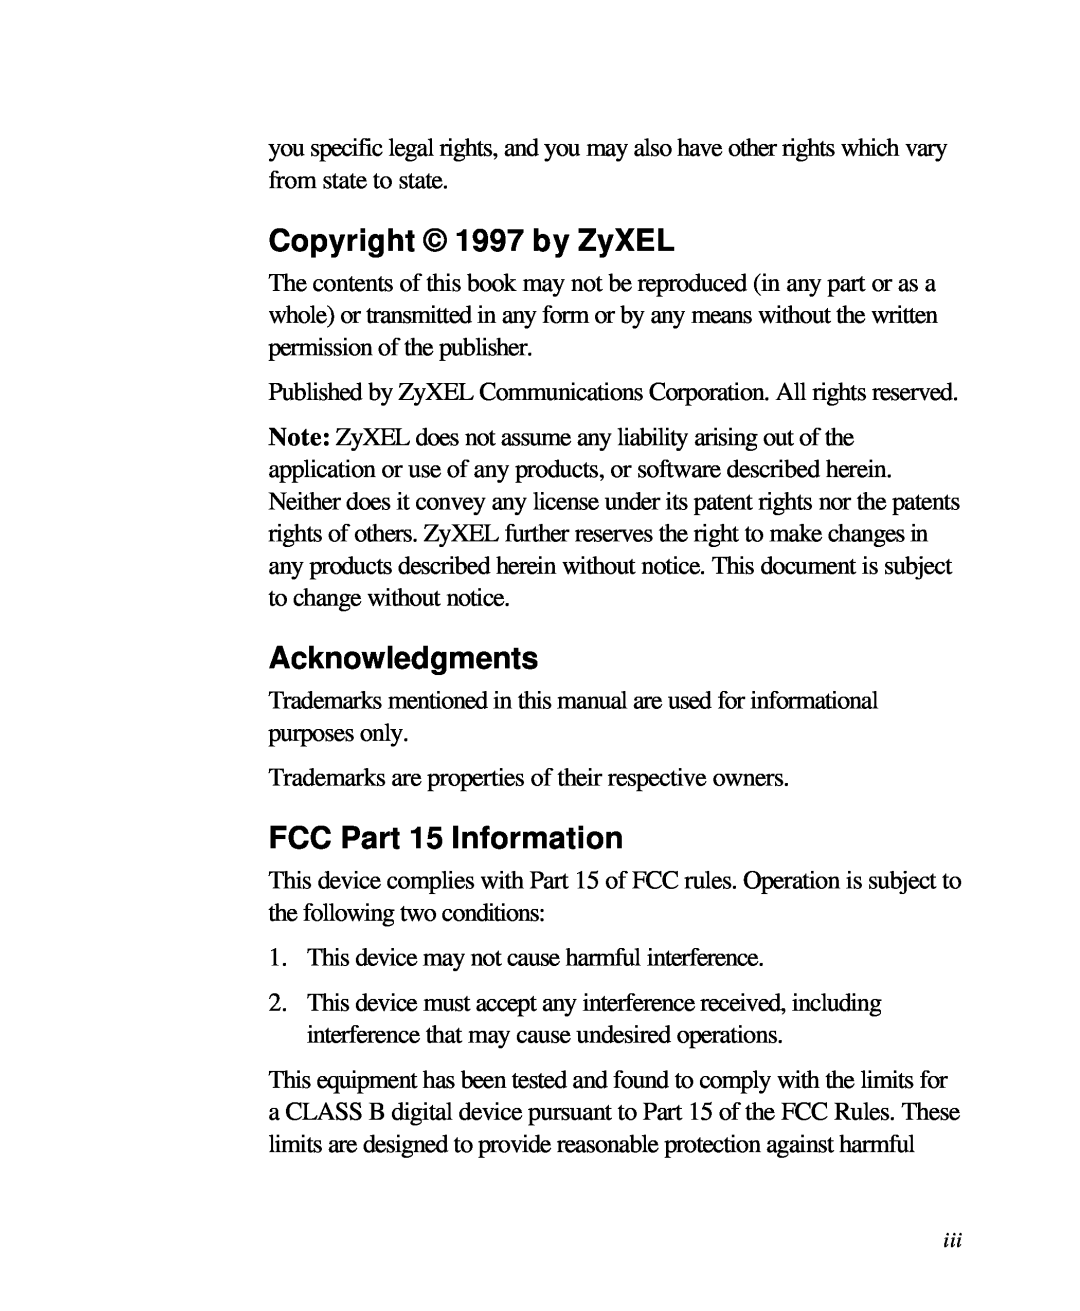 ZyXEL Communications 28641 user manual Copyright 1997 by ZyXEL, Acknowledgments, FCC Part 15 Information 